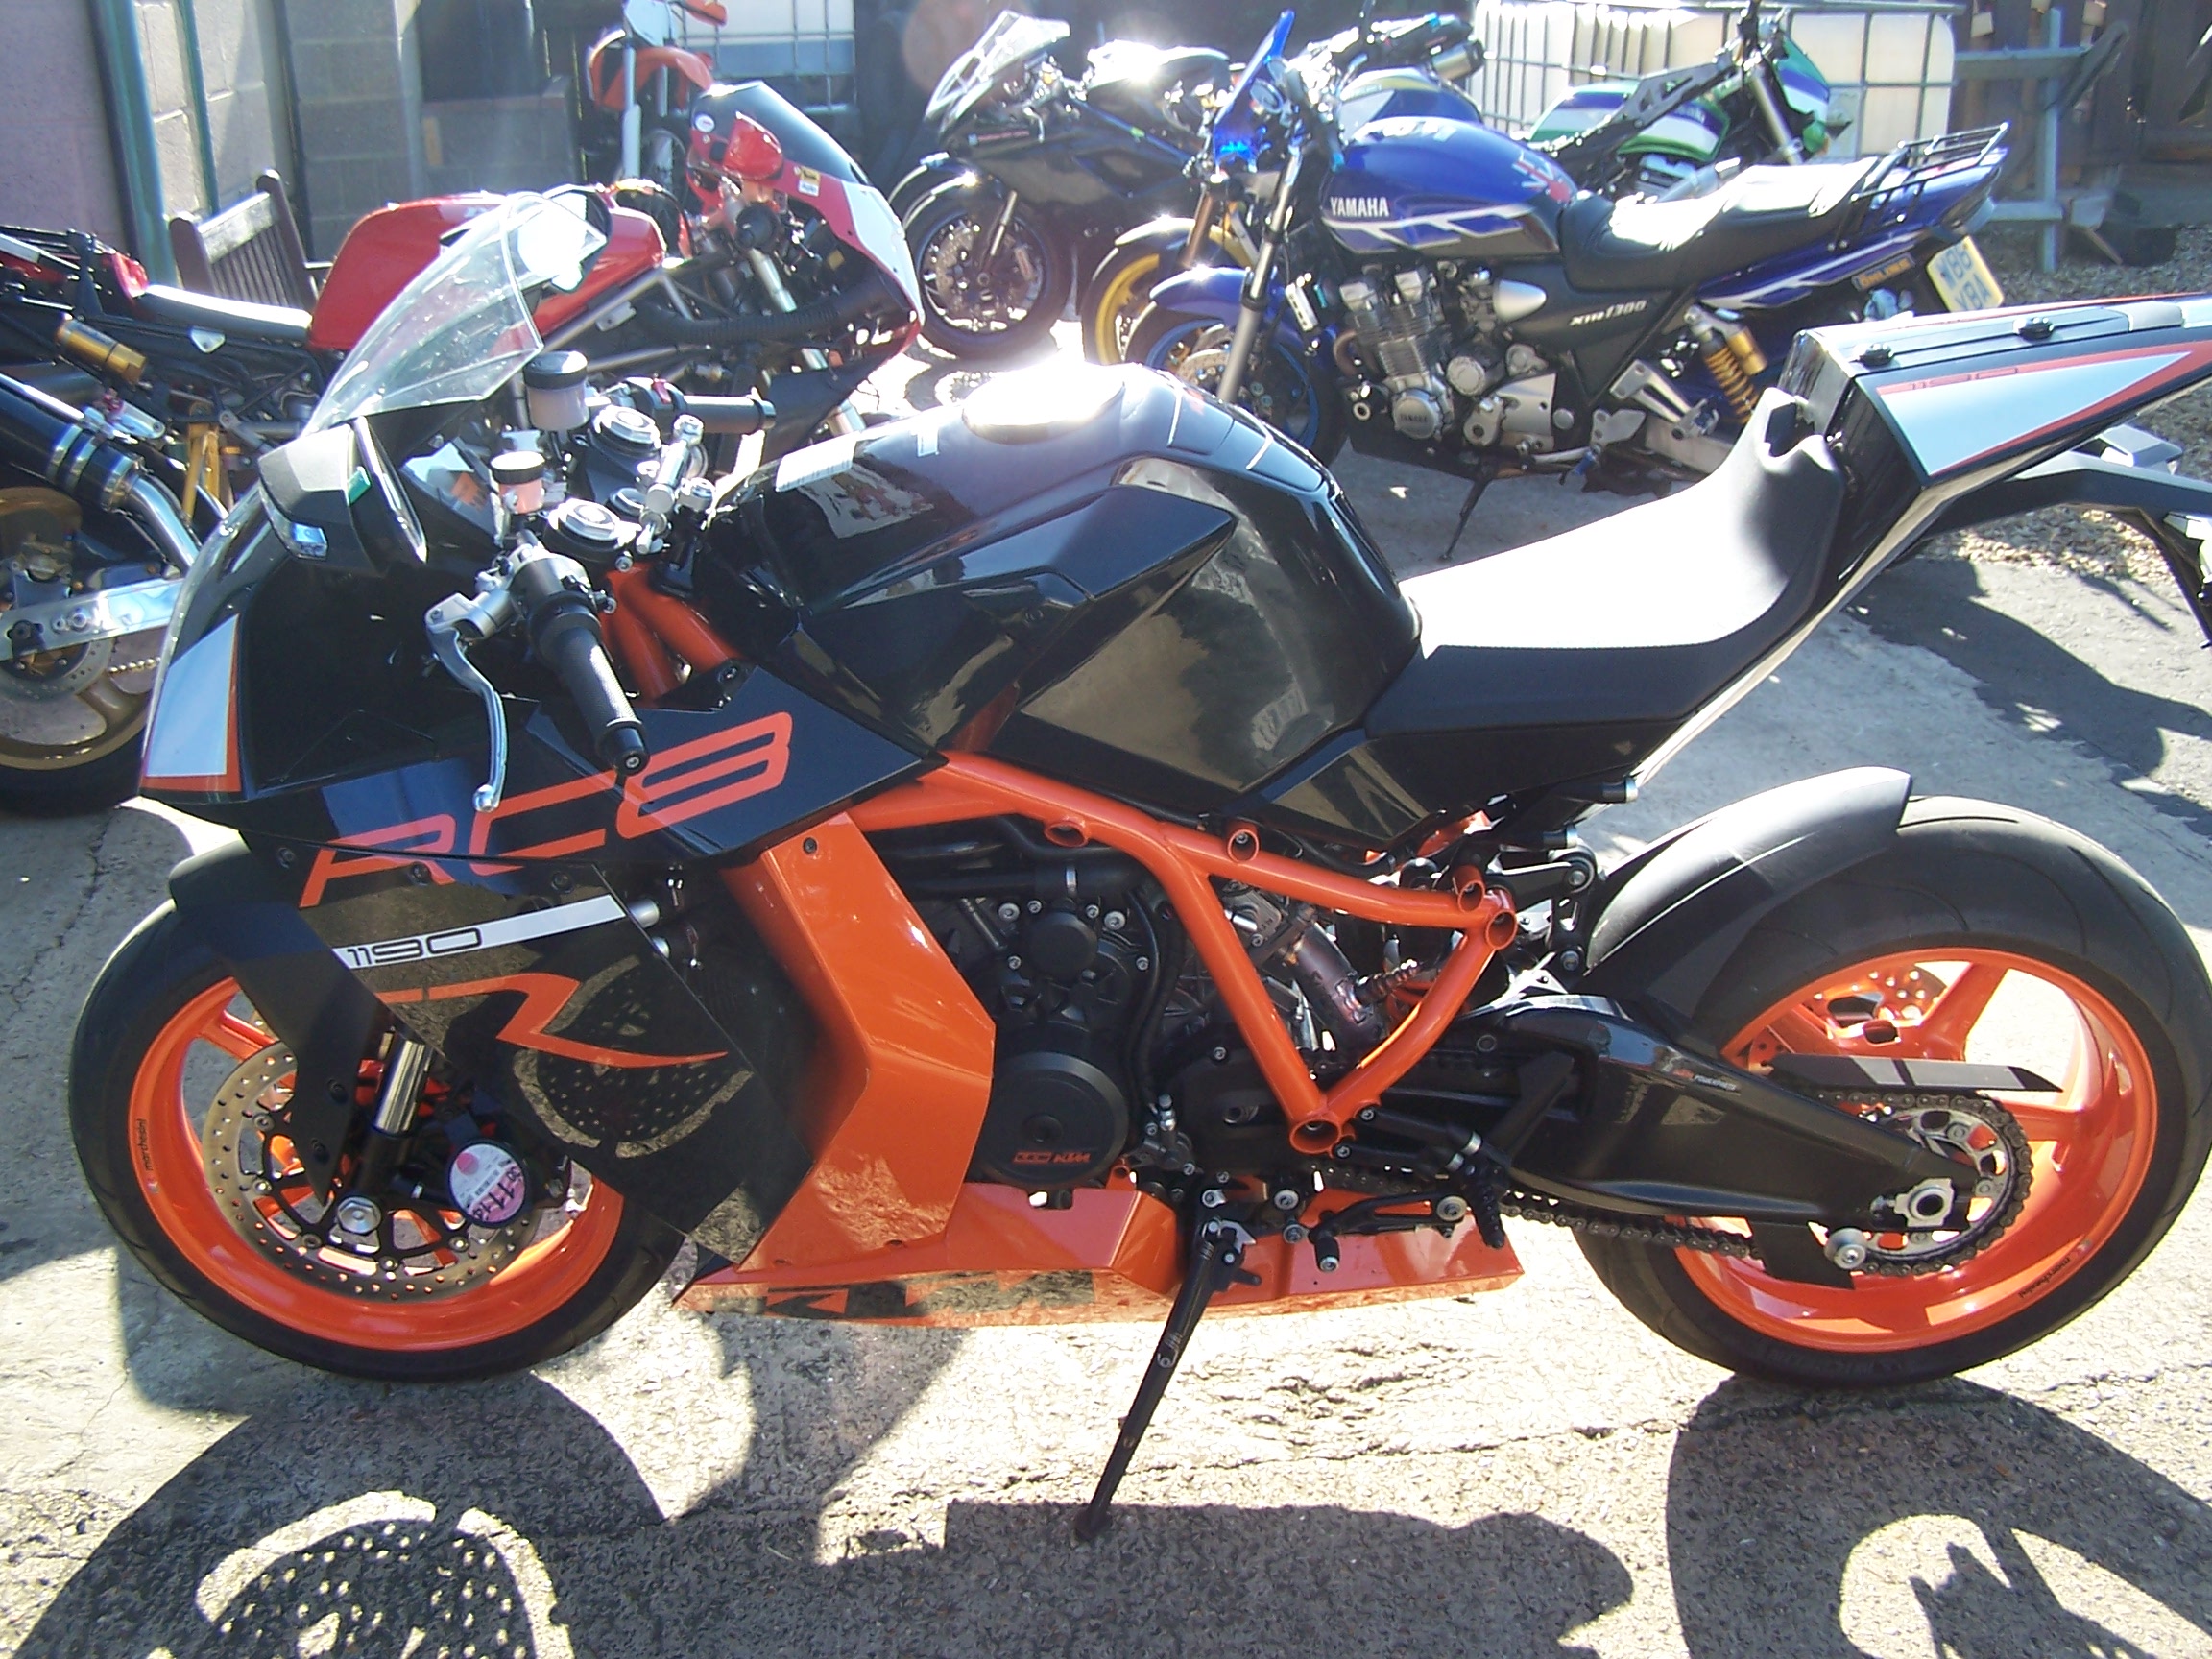 2012 KTM RC8R ECU remap – a great sports bike made better (because the KTM dealer wouldn’t)